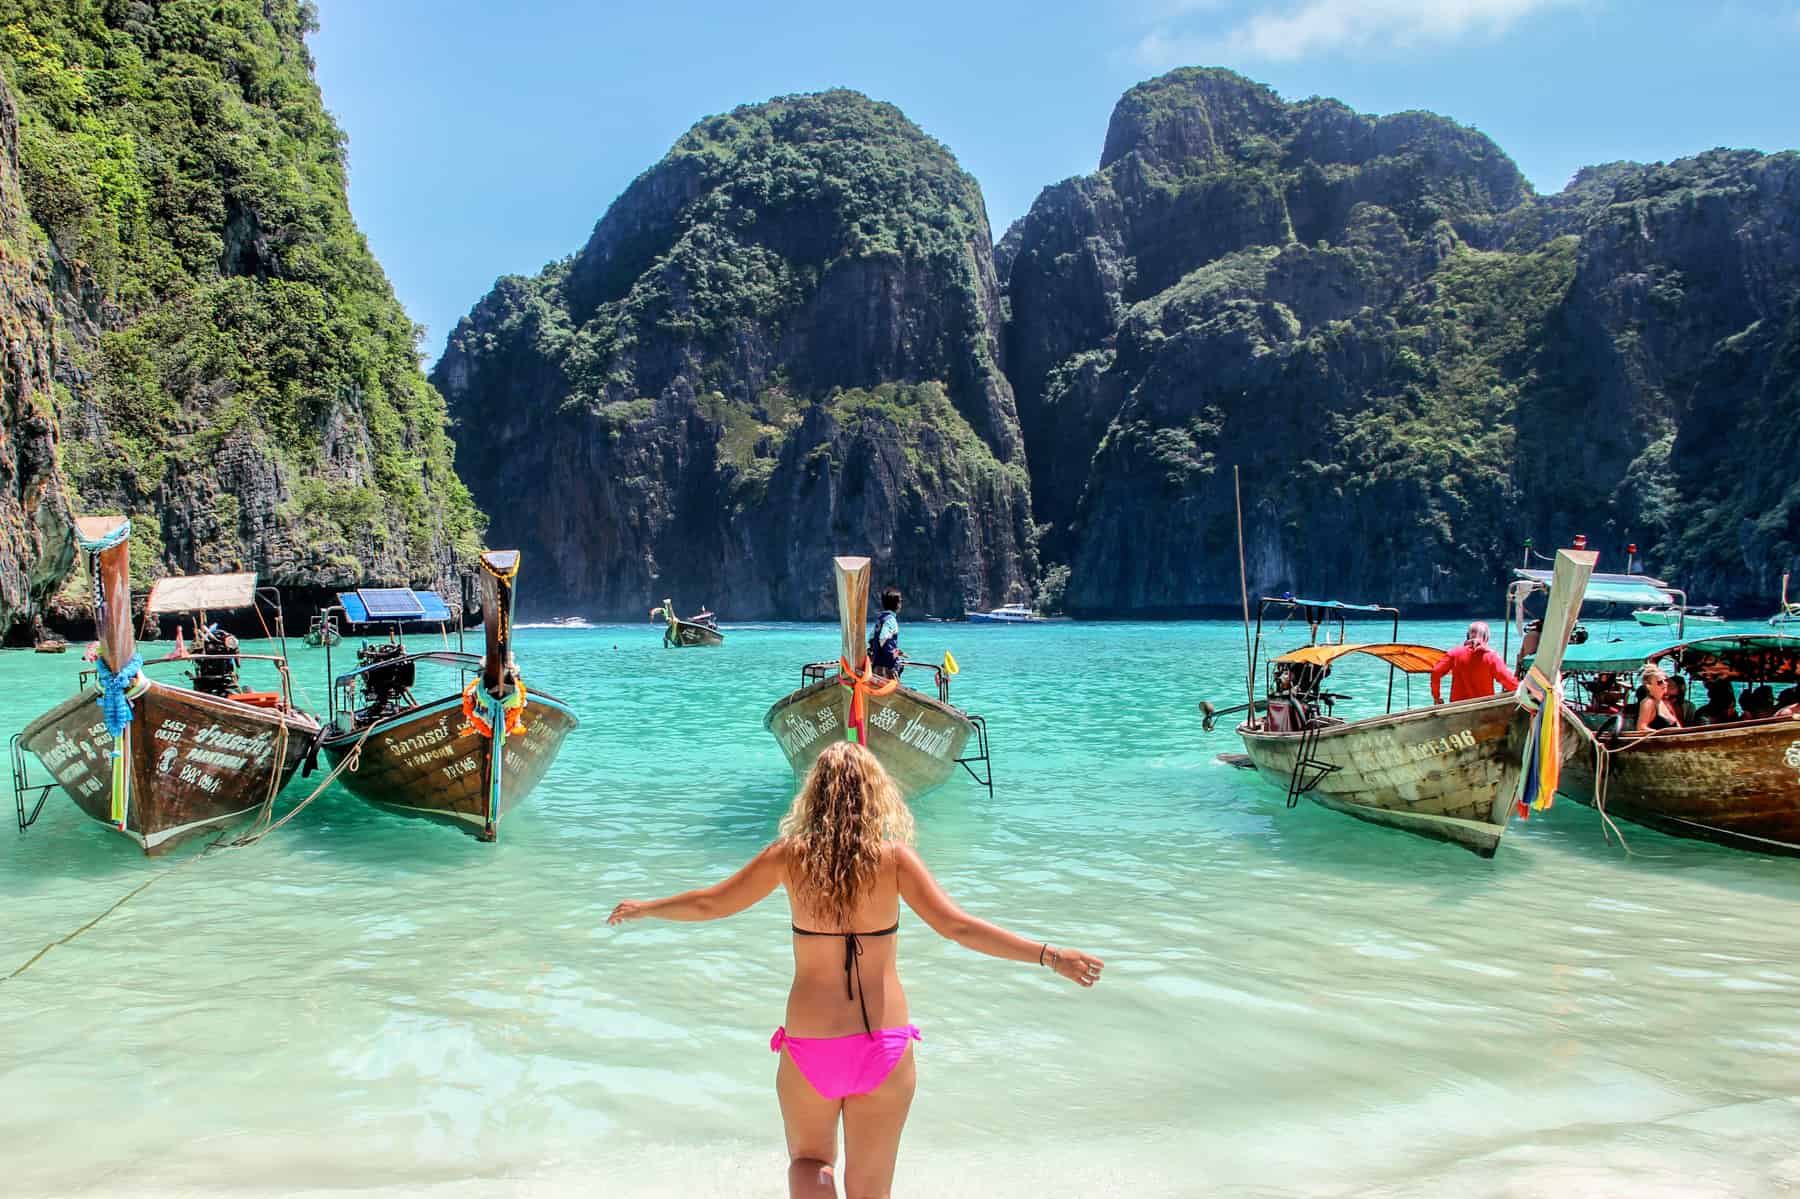 A woman in a black and pink bikini stands in the shallow clear waters of Maya Bay facing a row of five wooden boats and the surrounding limestone rocks.